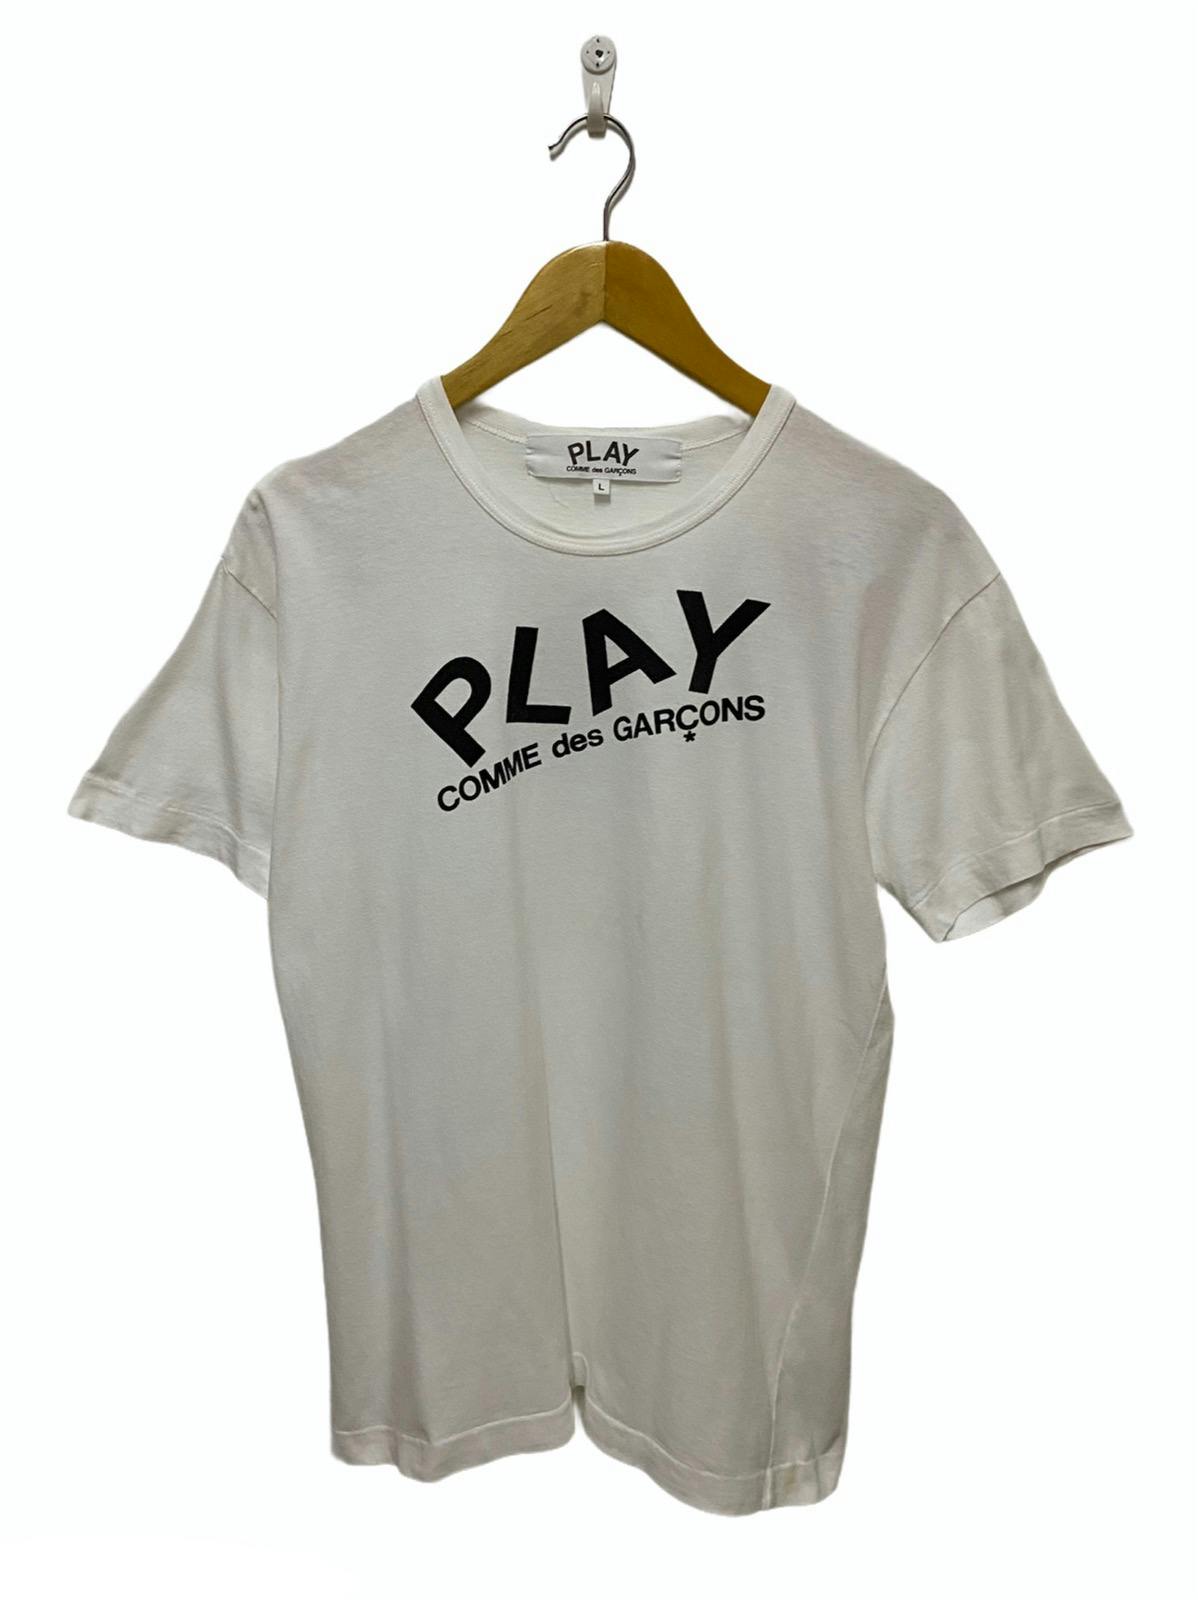 CDG Play Comme des Garcons Tshirt - 1